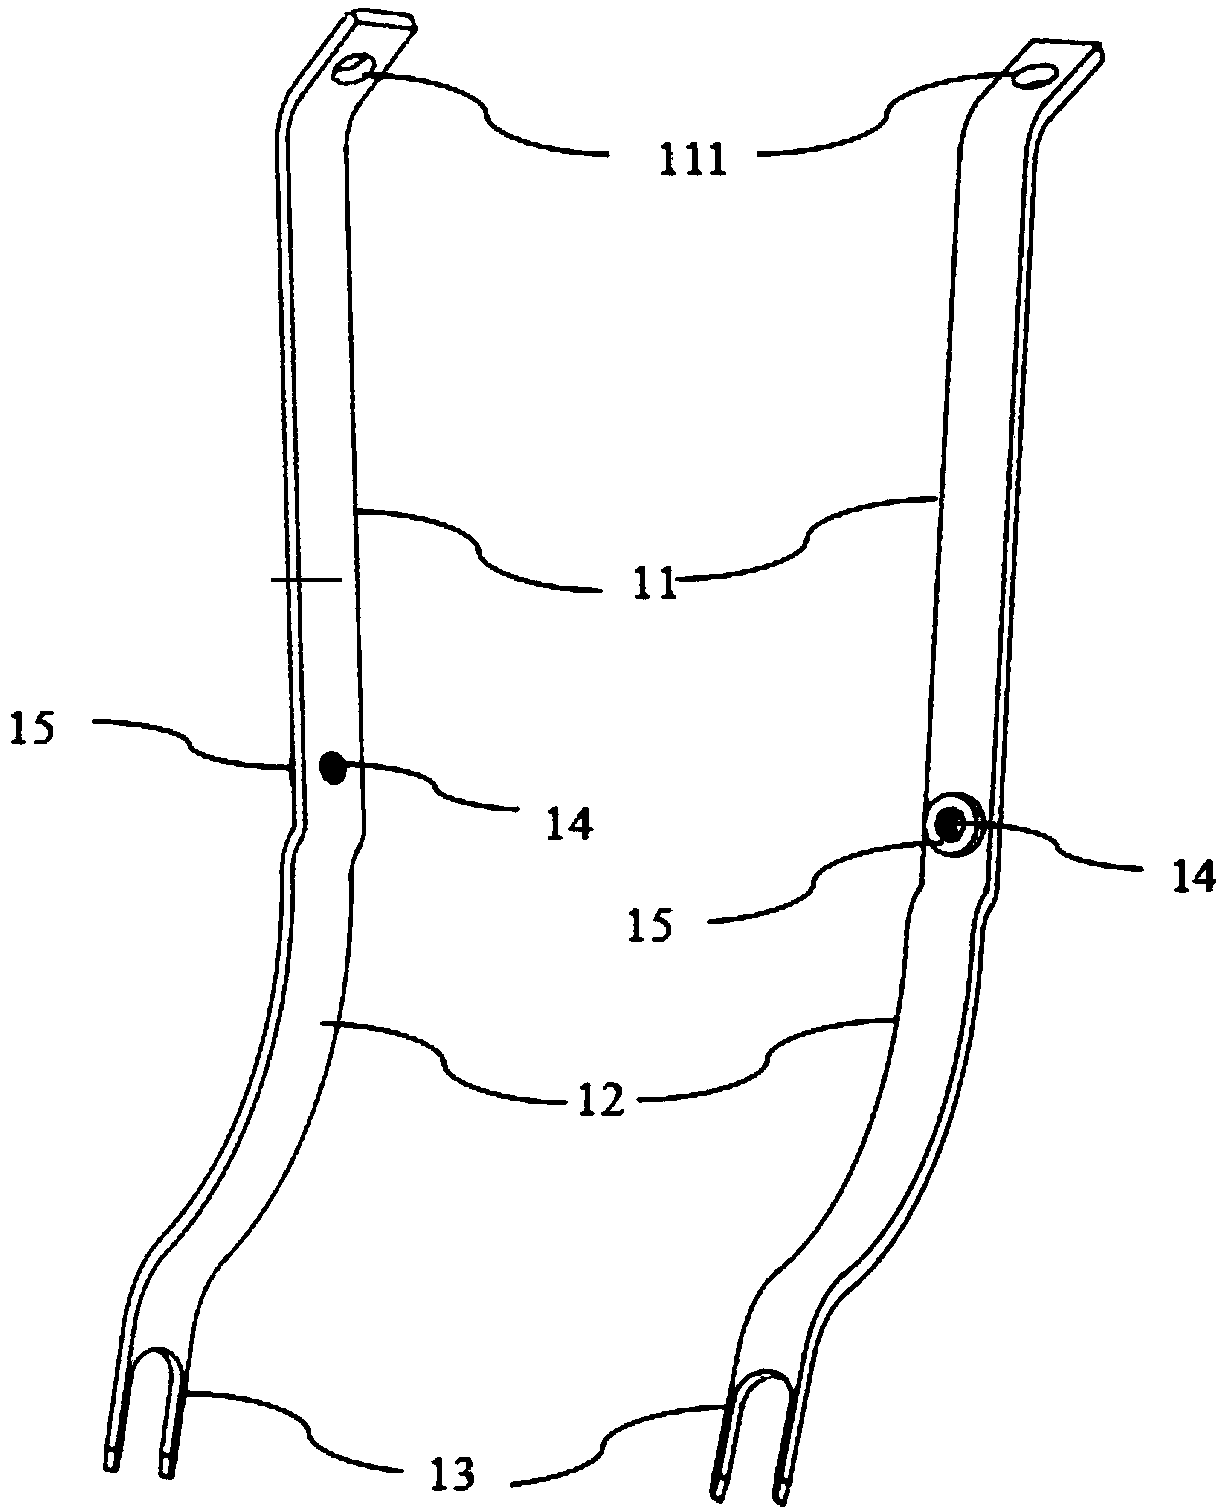 Posterior cruciate ligament protection device